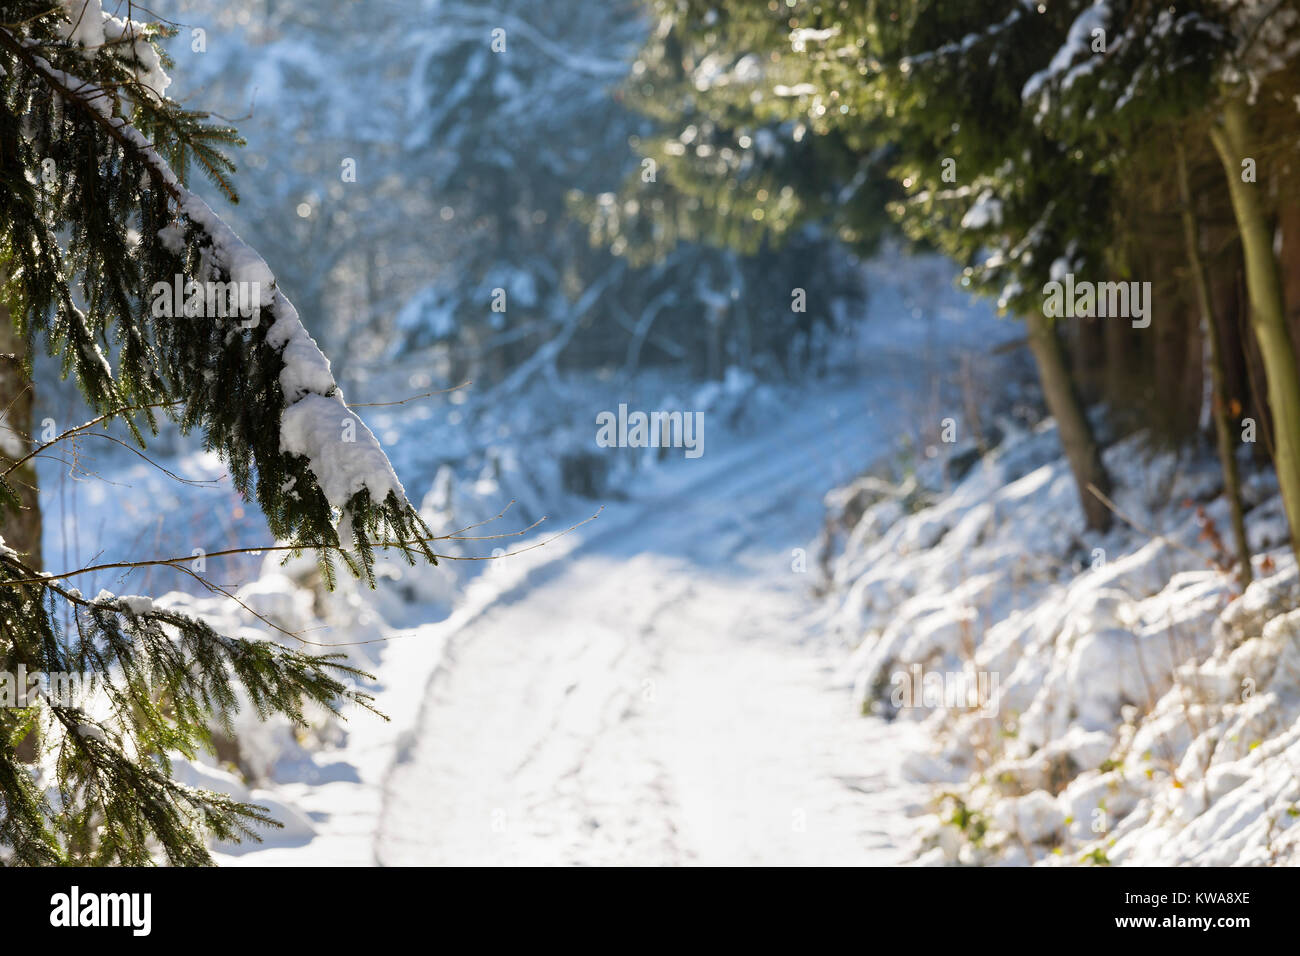 Snow covered trees against the light with a dirt road in the background near the Eifel village Monschau Rohren in winter, Germany. Stock Photo